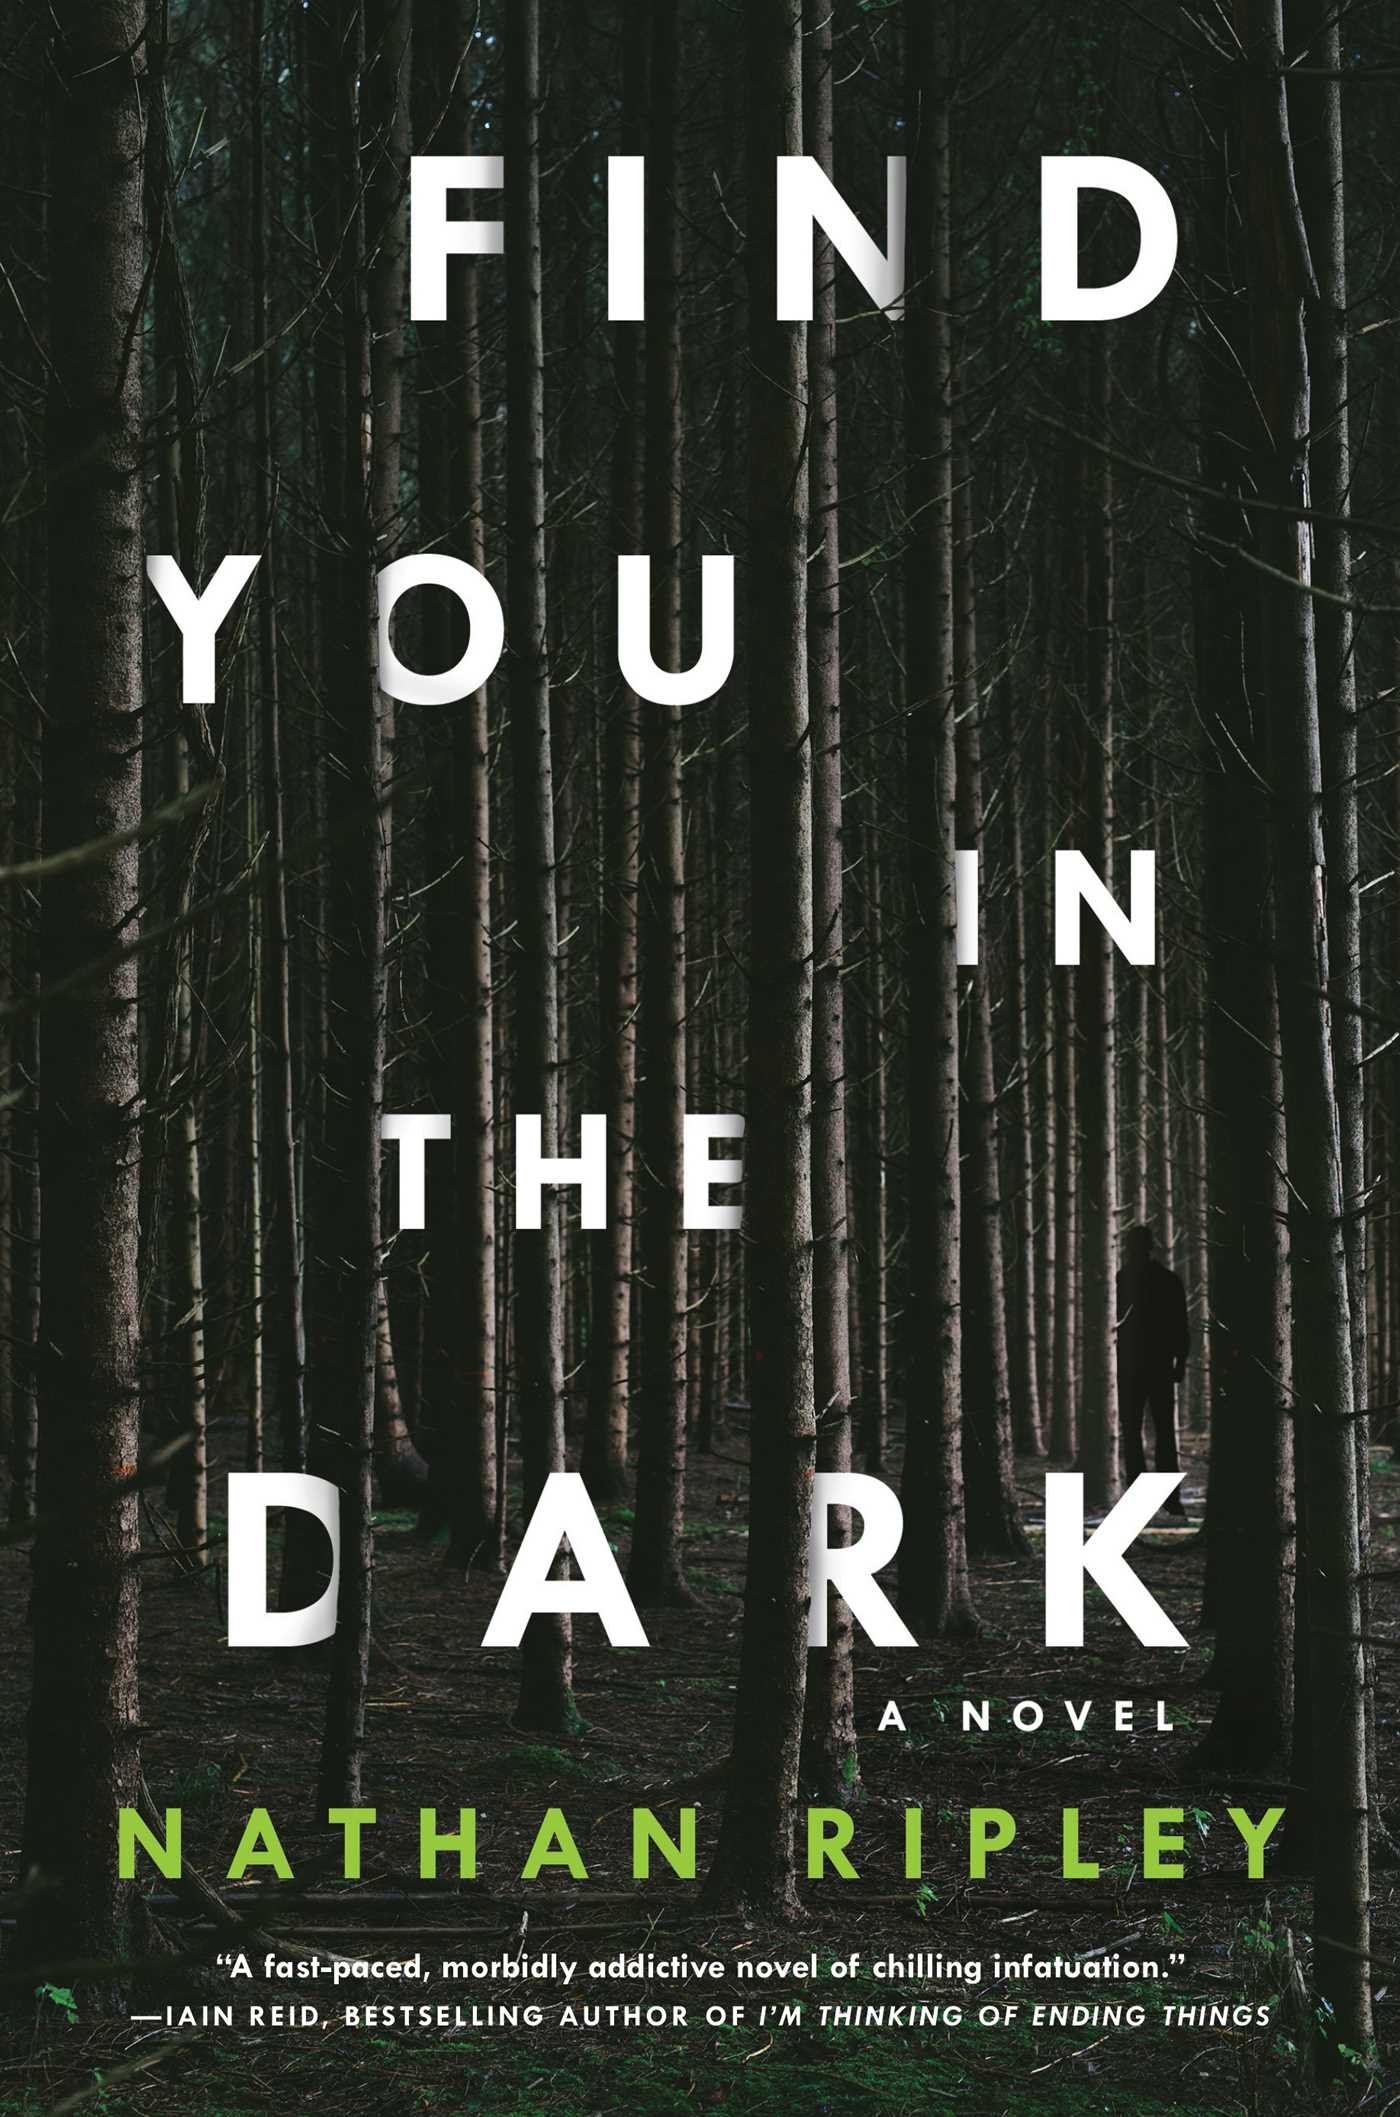 Find You in the Dark: A Novel